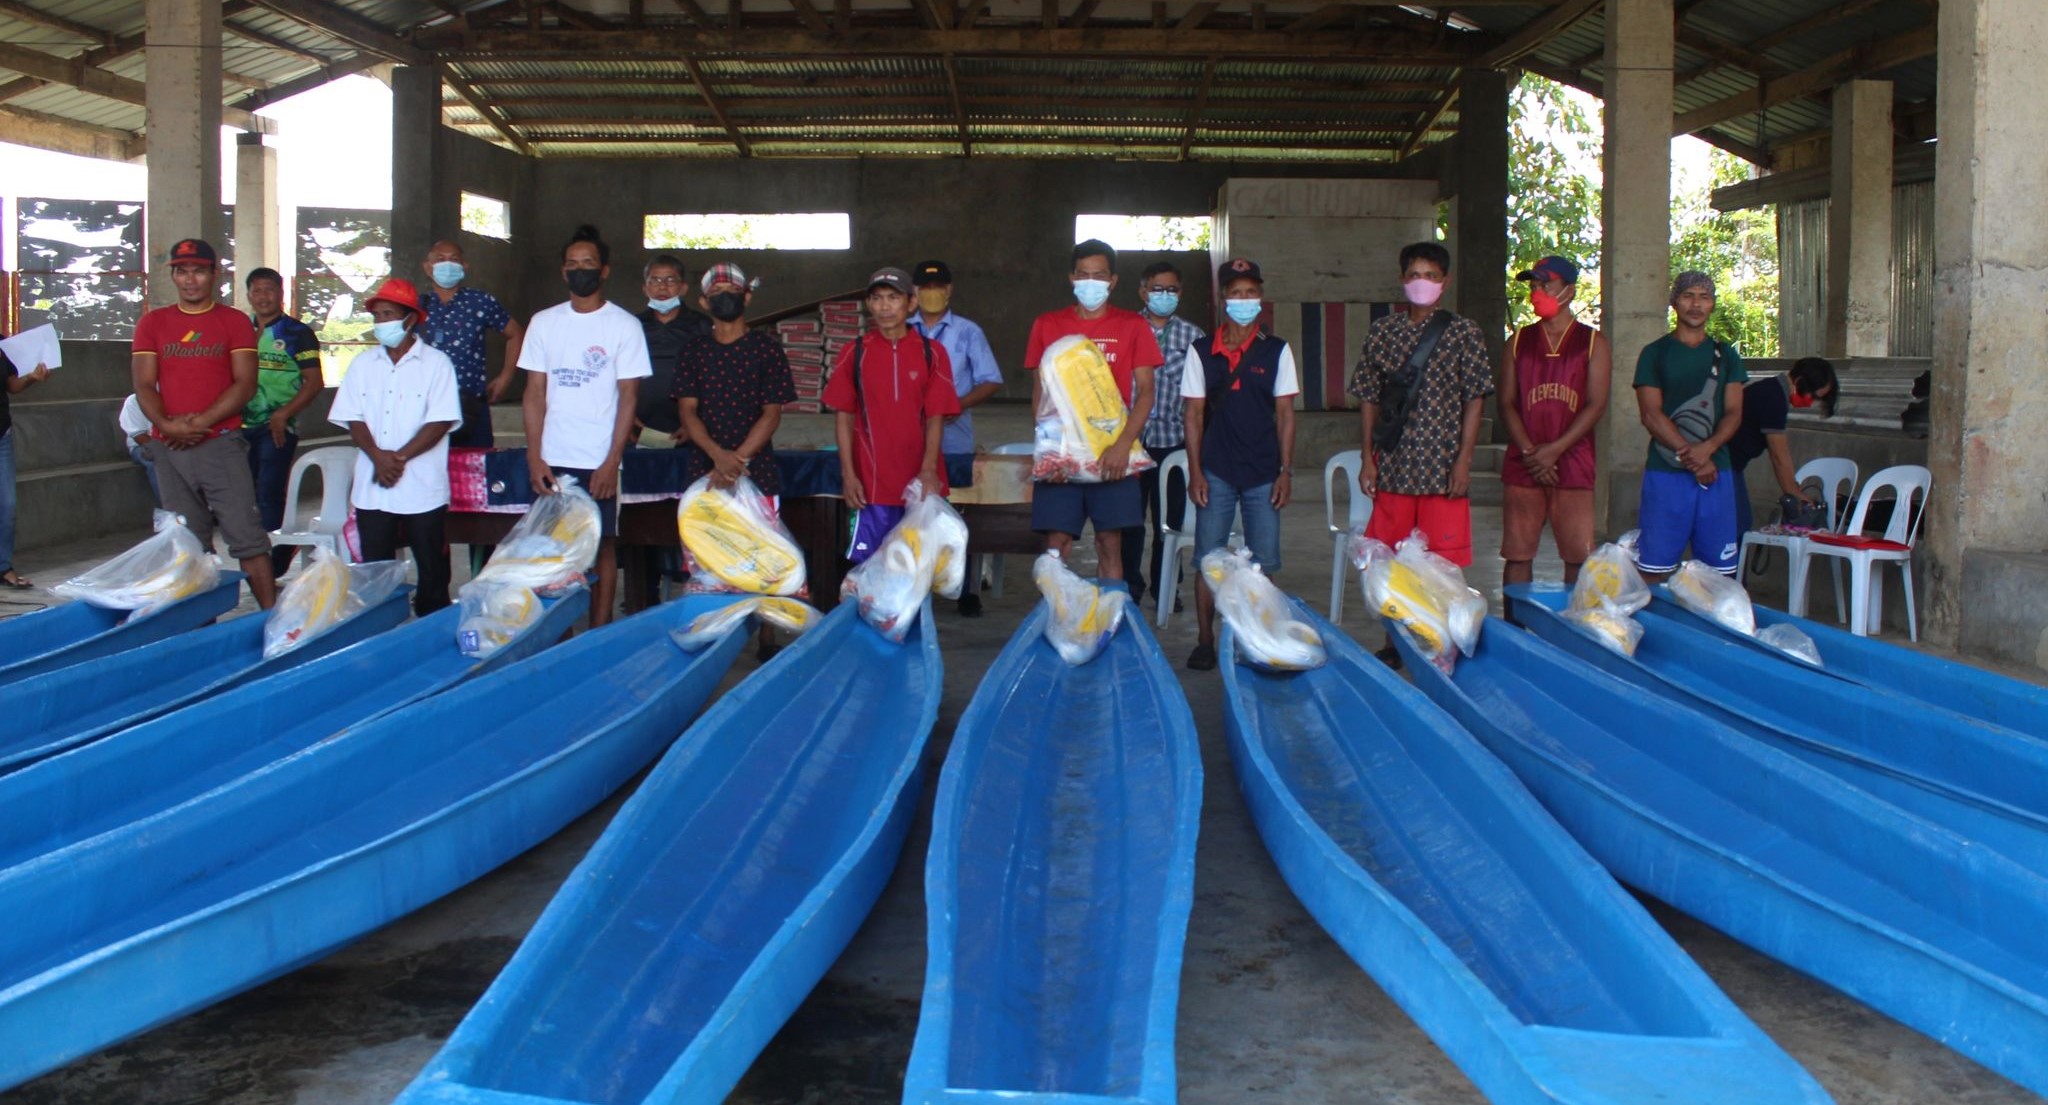 80 fisherfolk families in Agusan del Sur received fishing livelihood assistance